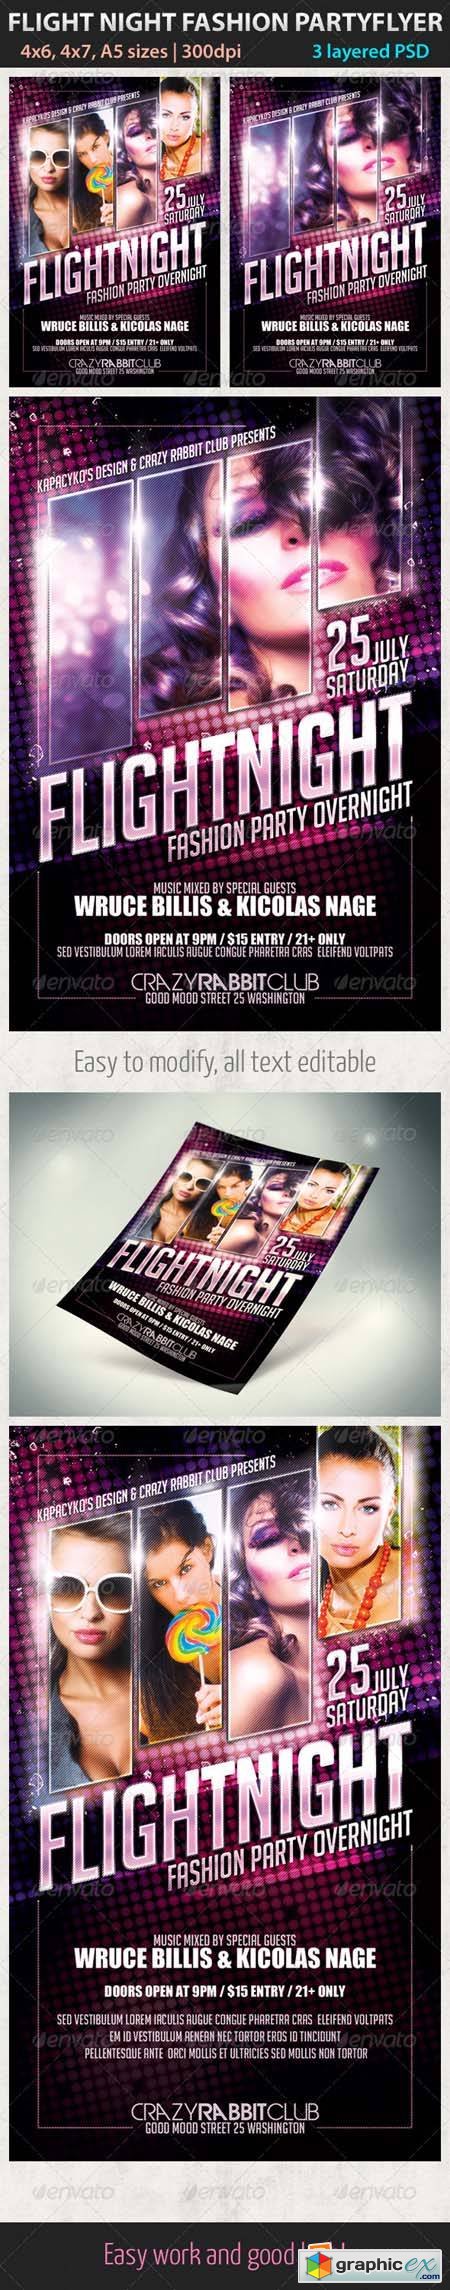 Flight Night Fashion Party Flyer Template